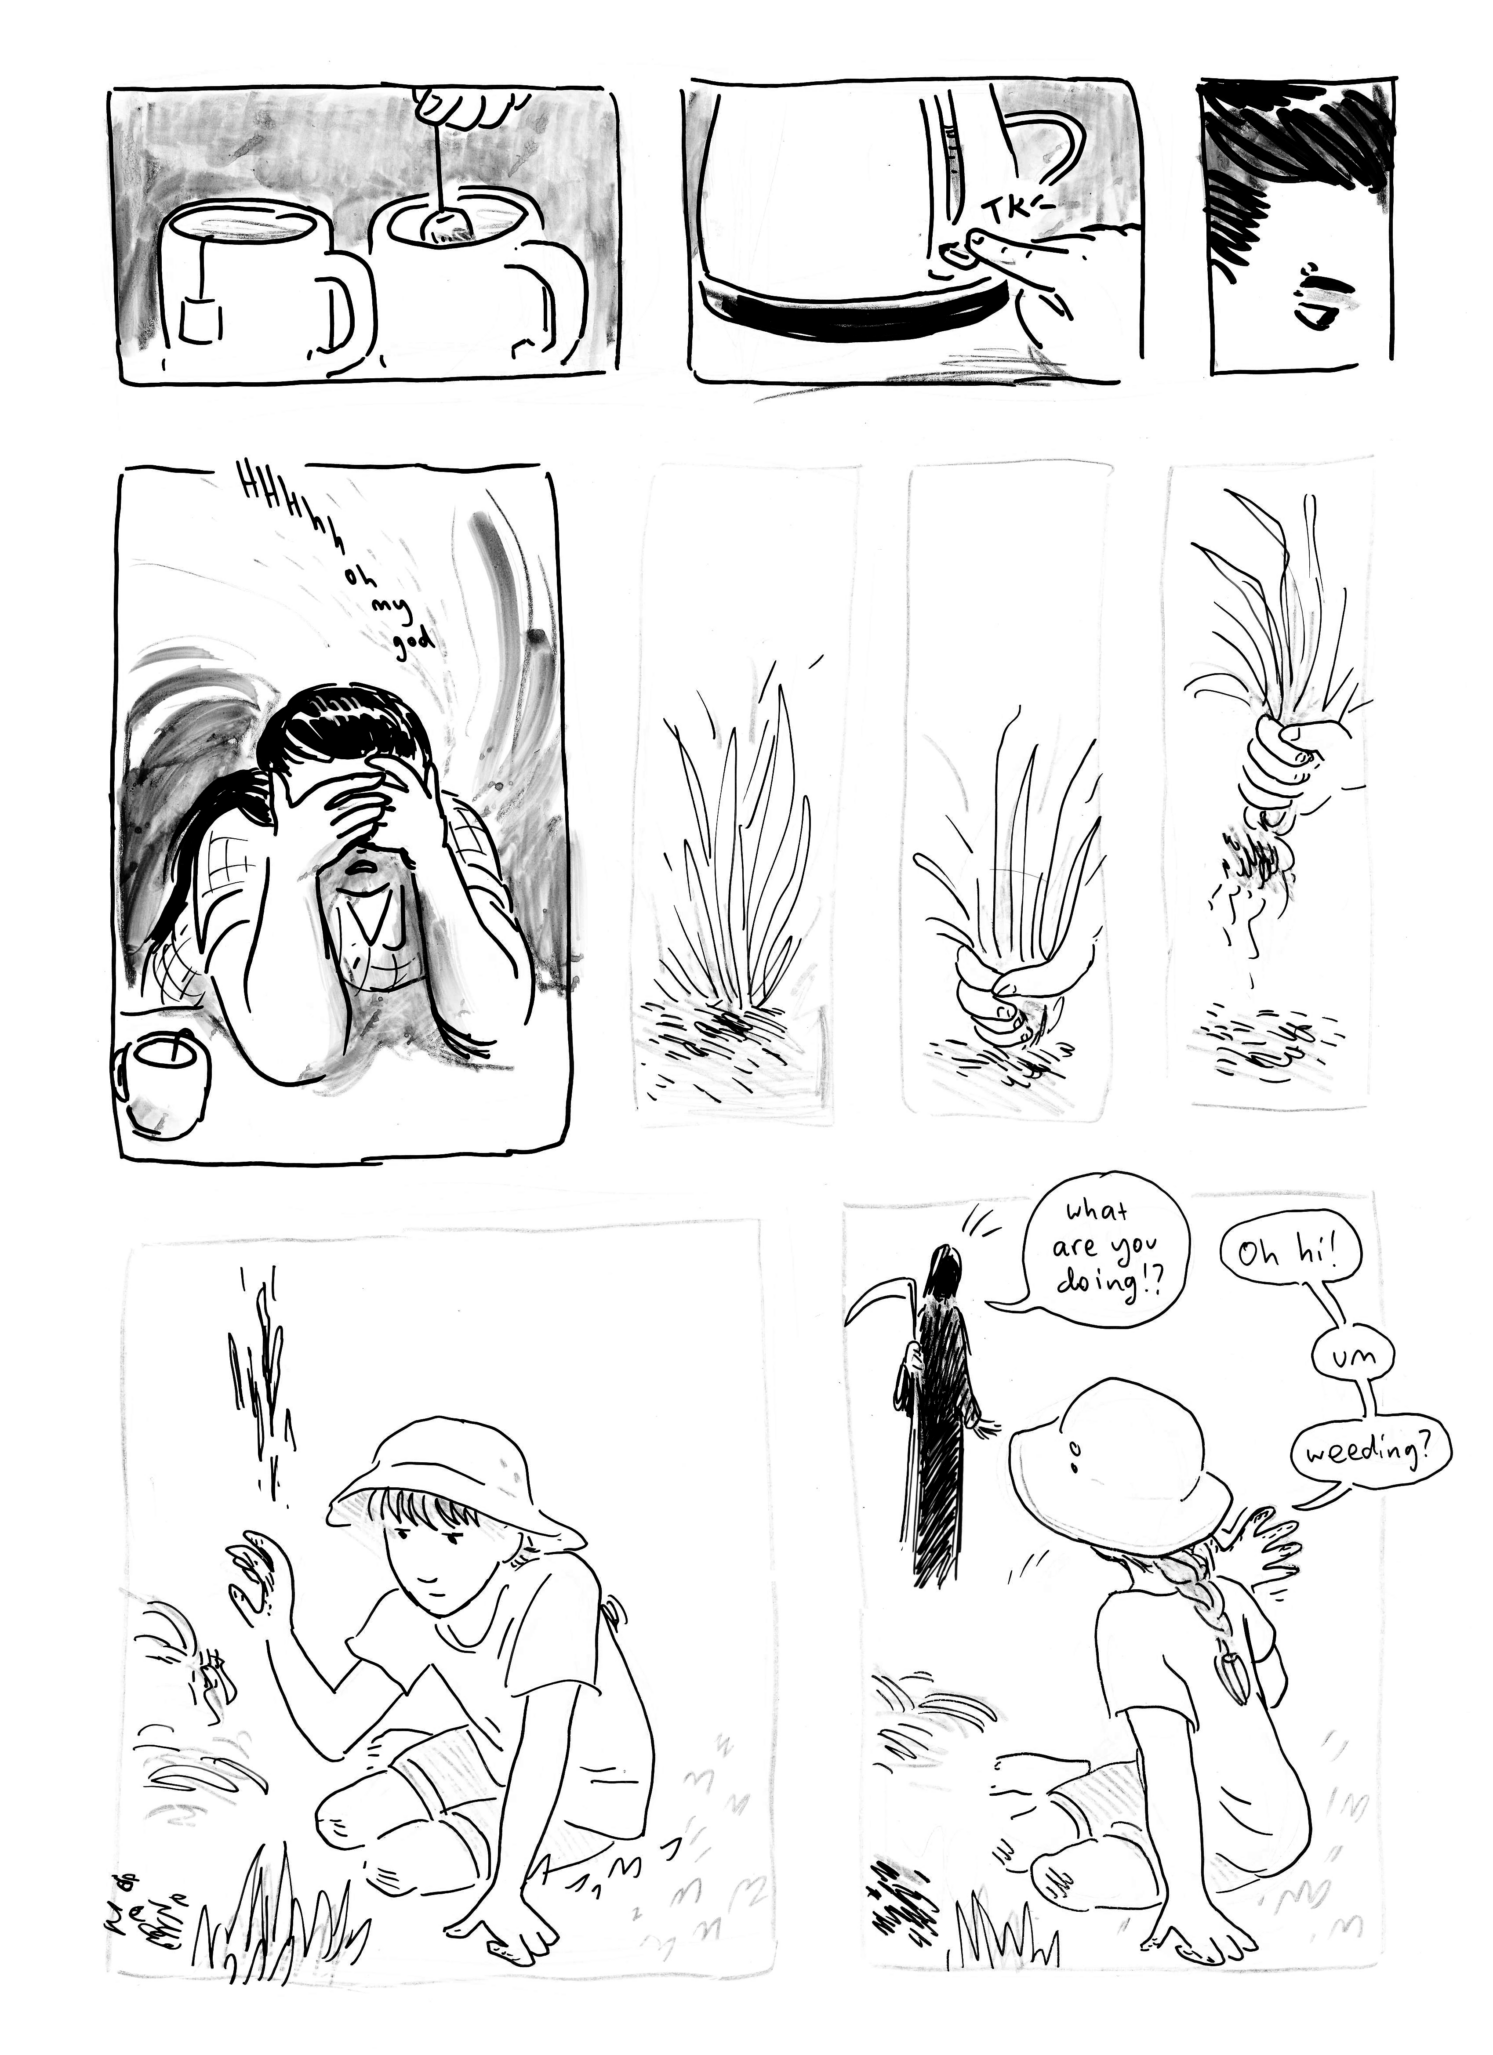 this may be the only time weeds are discussed in the comic, despite my website's general aesthetic theme